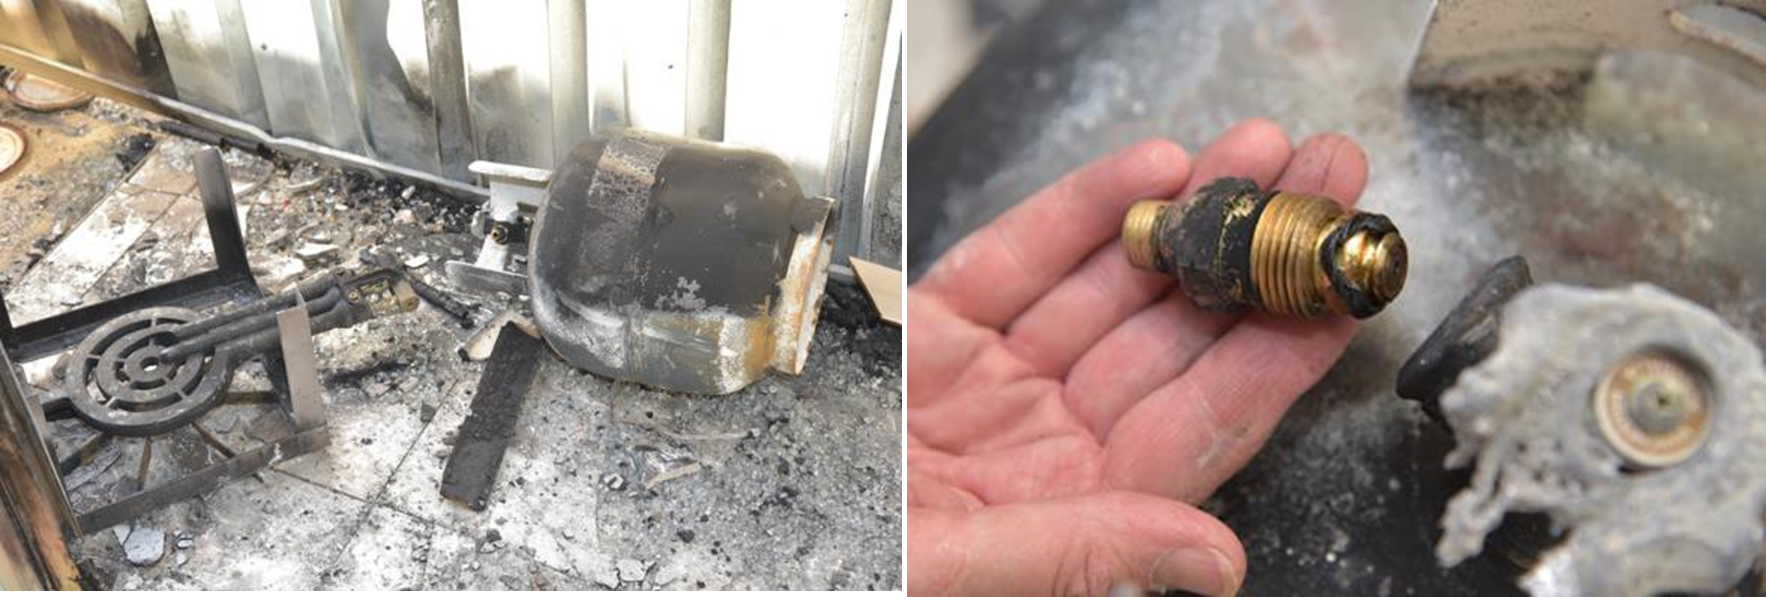 Photos of outdoor portable wok burner and damaged POL connector involved in explosion incident